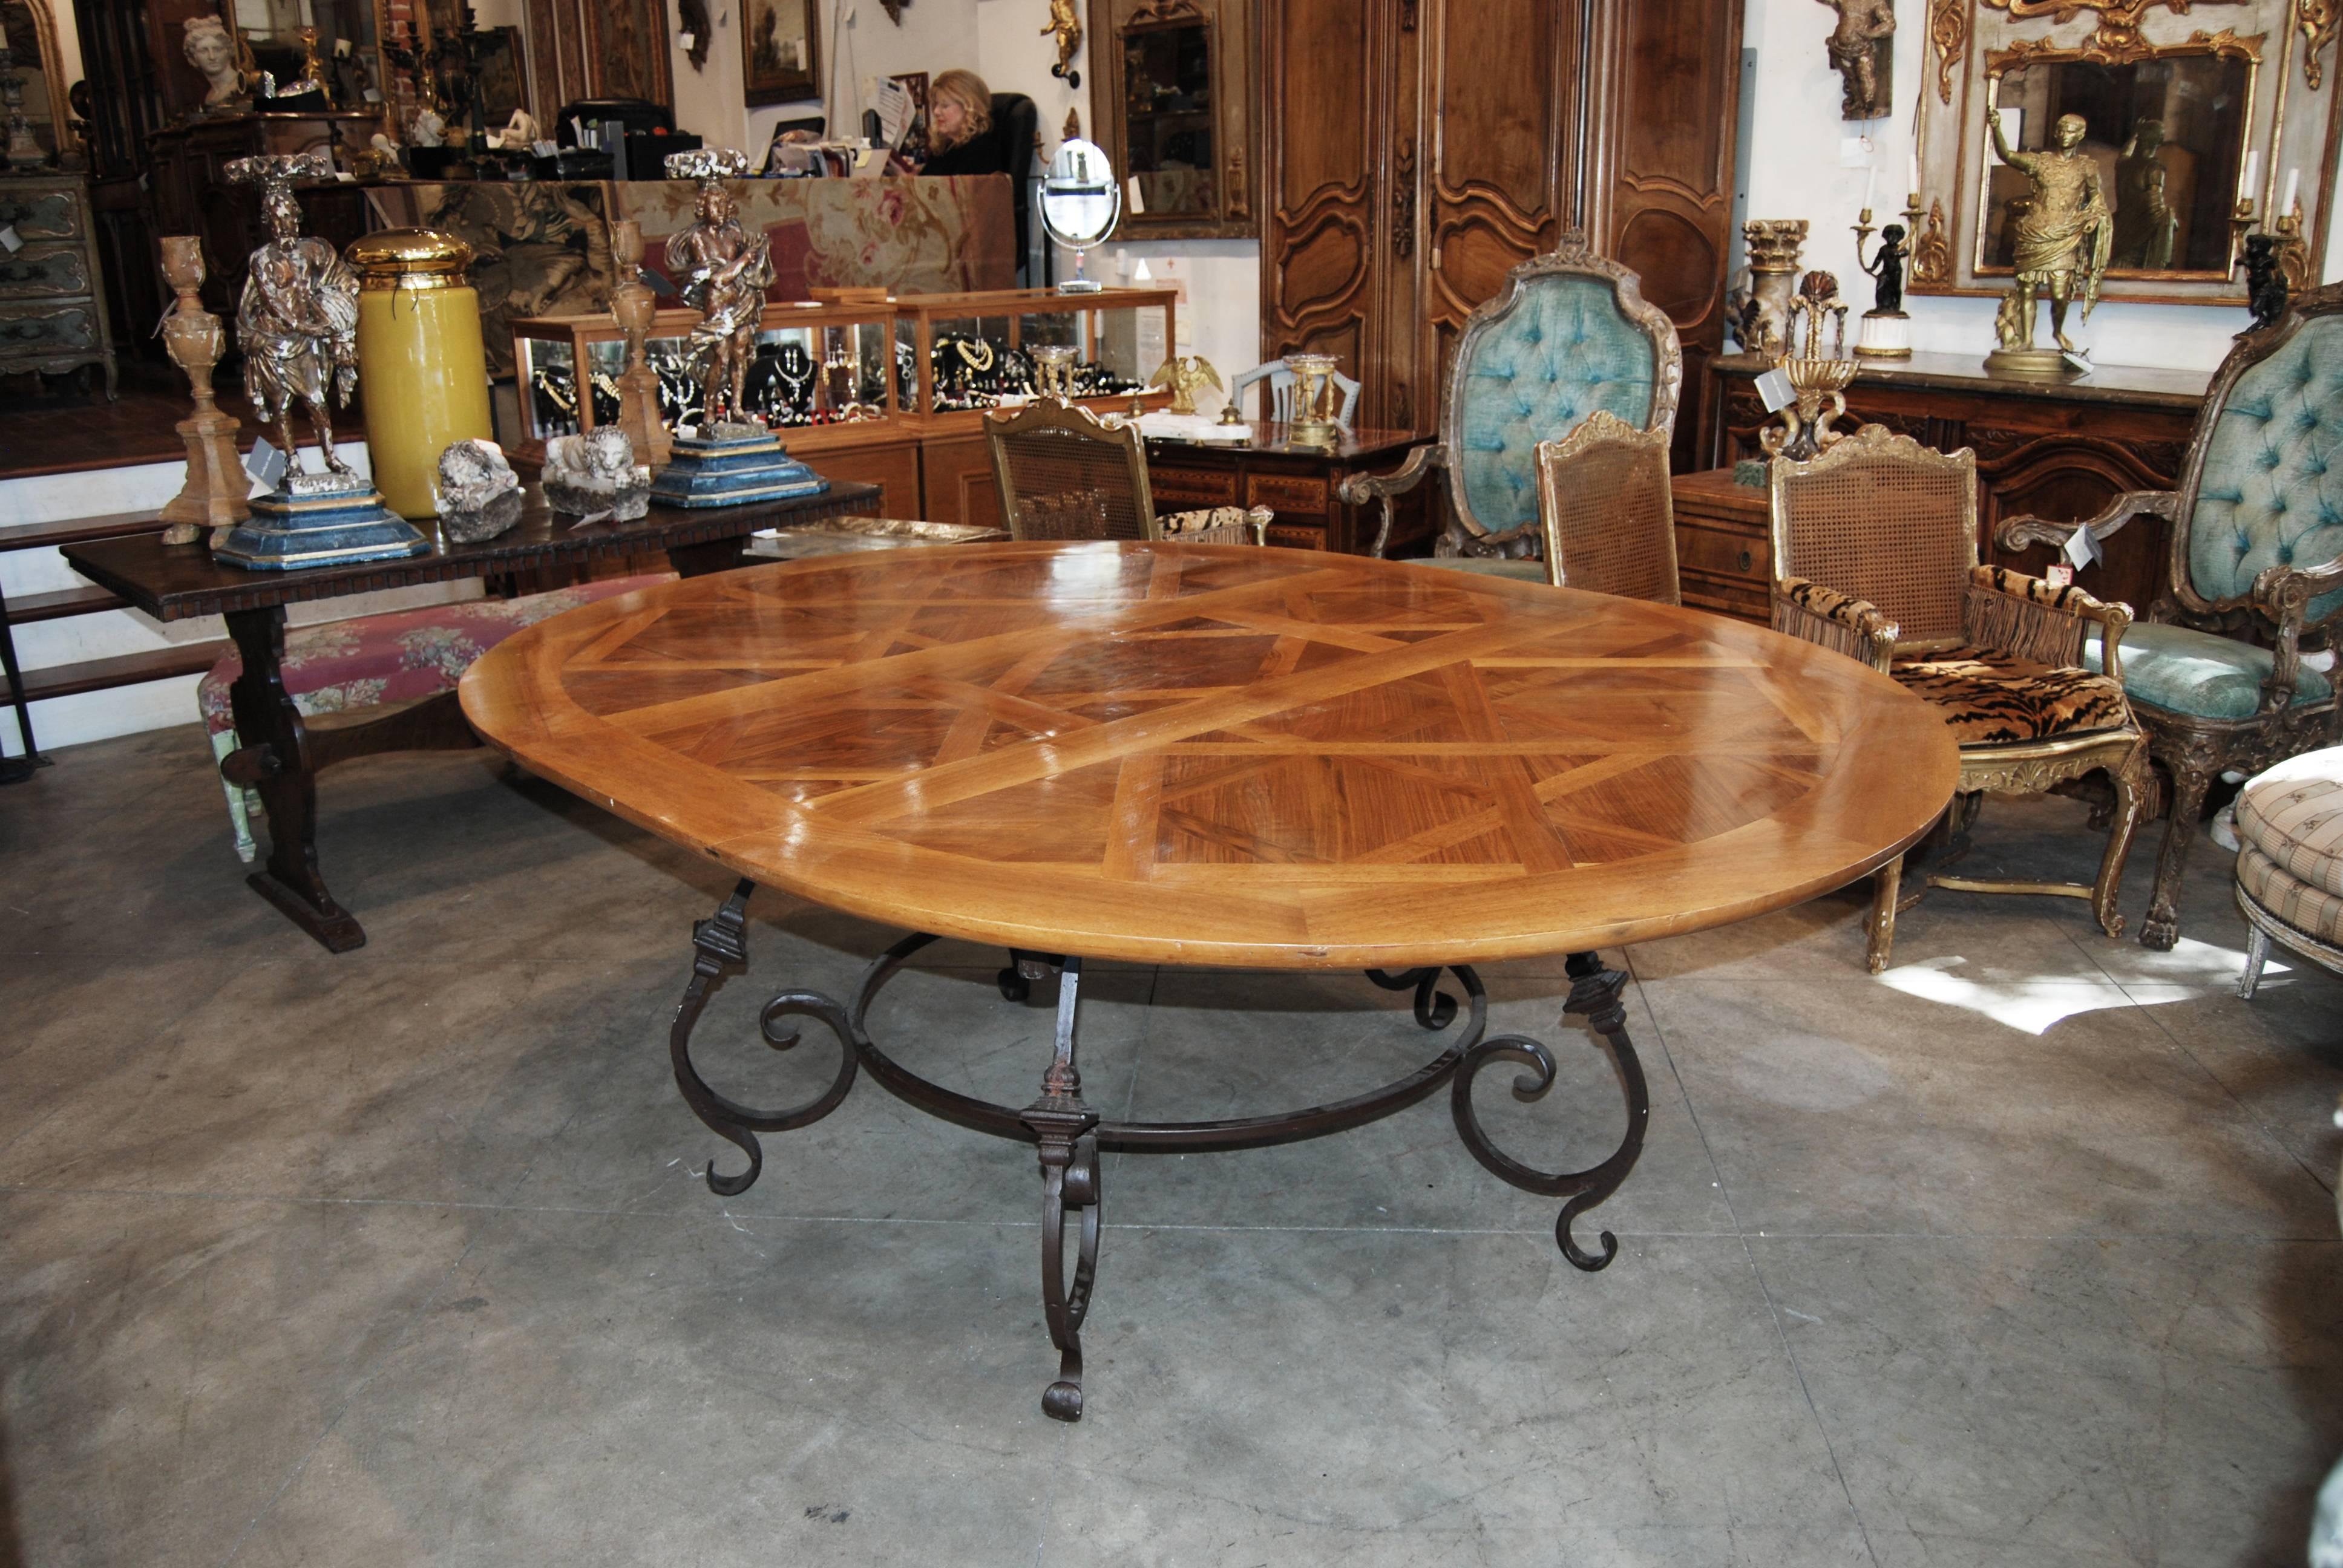 Beautiful oval Parquet de Versailles oval dining table with beautiful iron base.